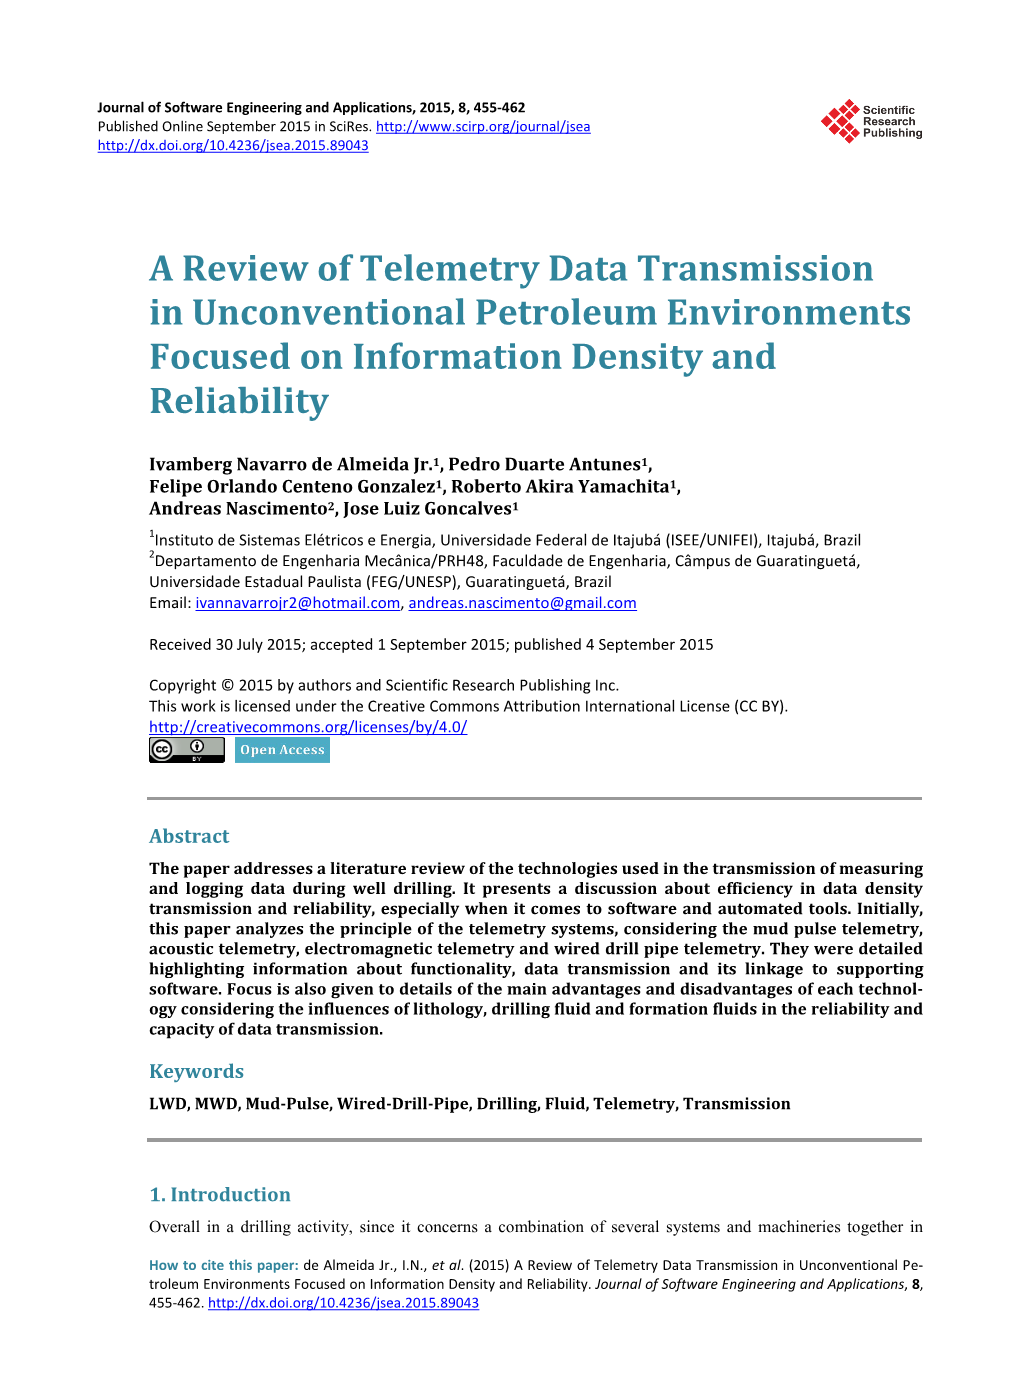 A Review of Telemetry Data Transmission in Unconventional Petroleum Environments Focused on Information Density and Reliability